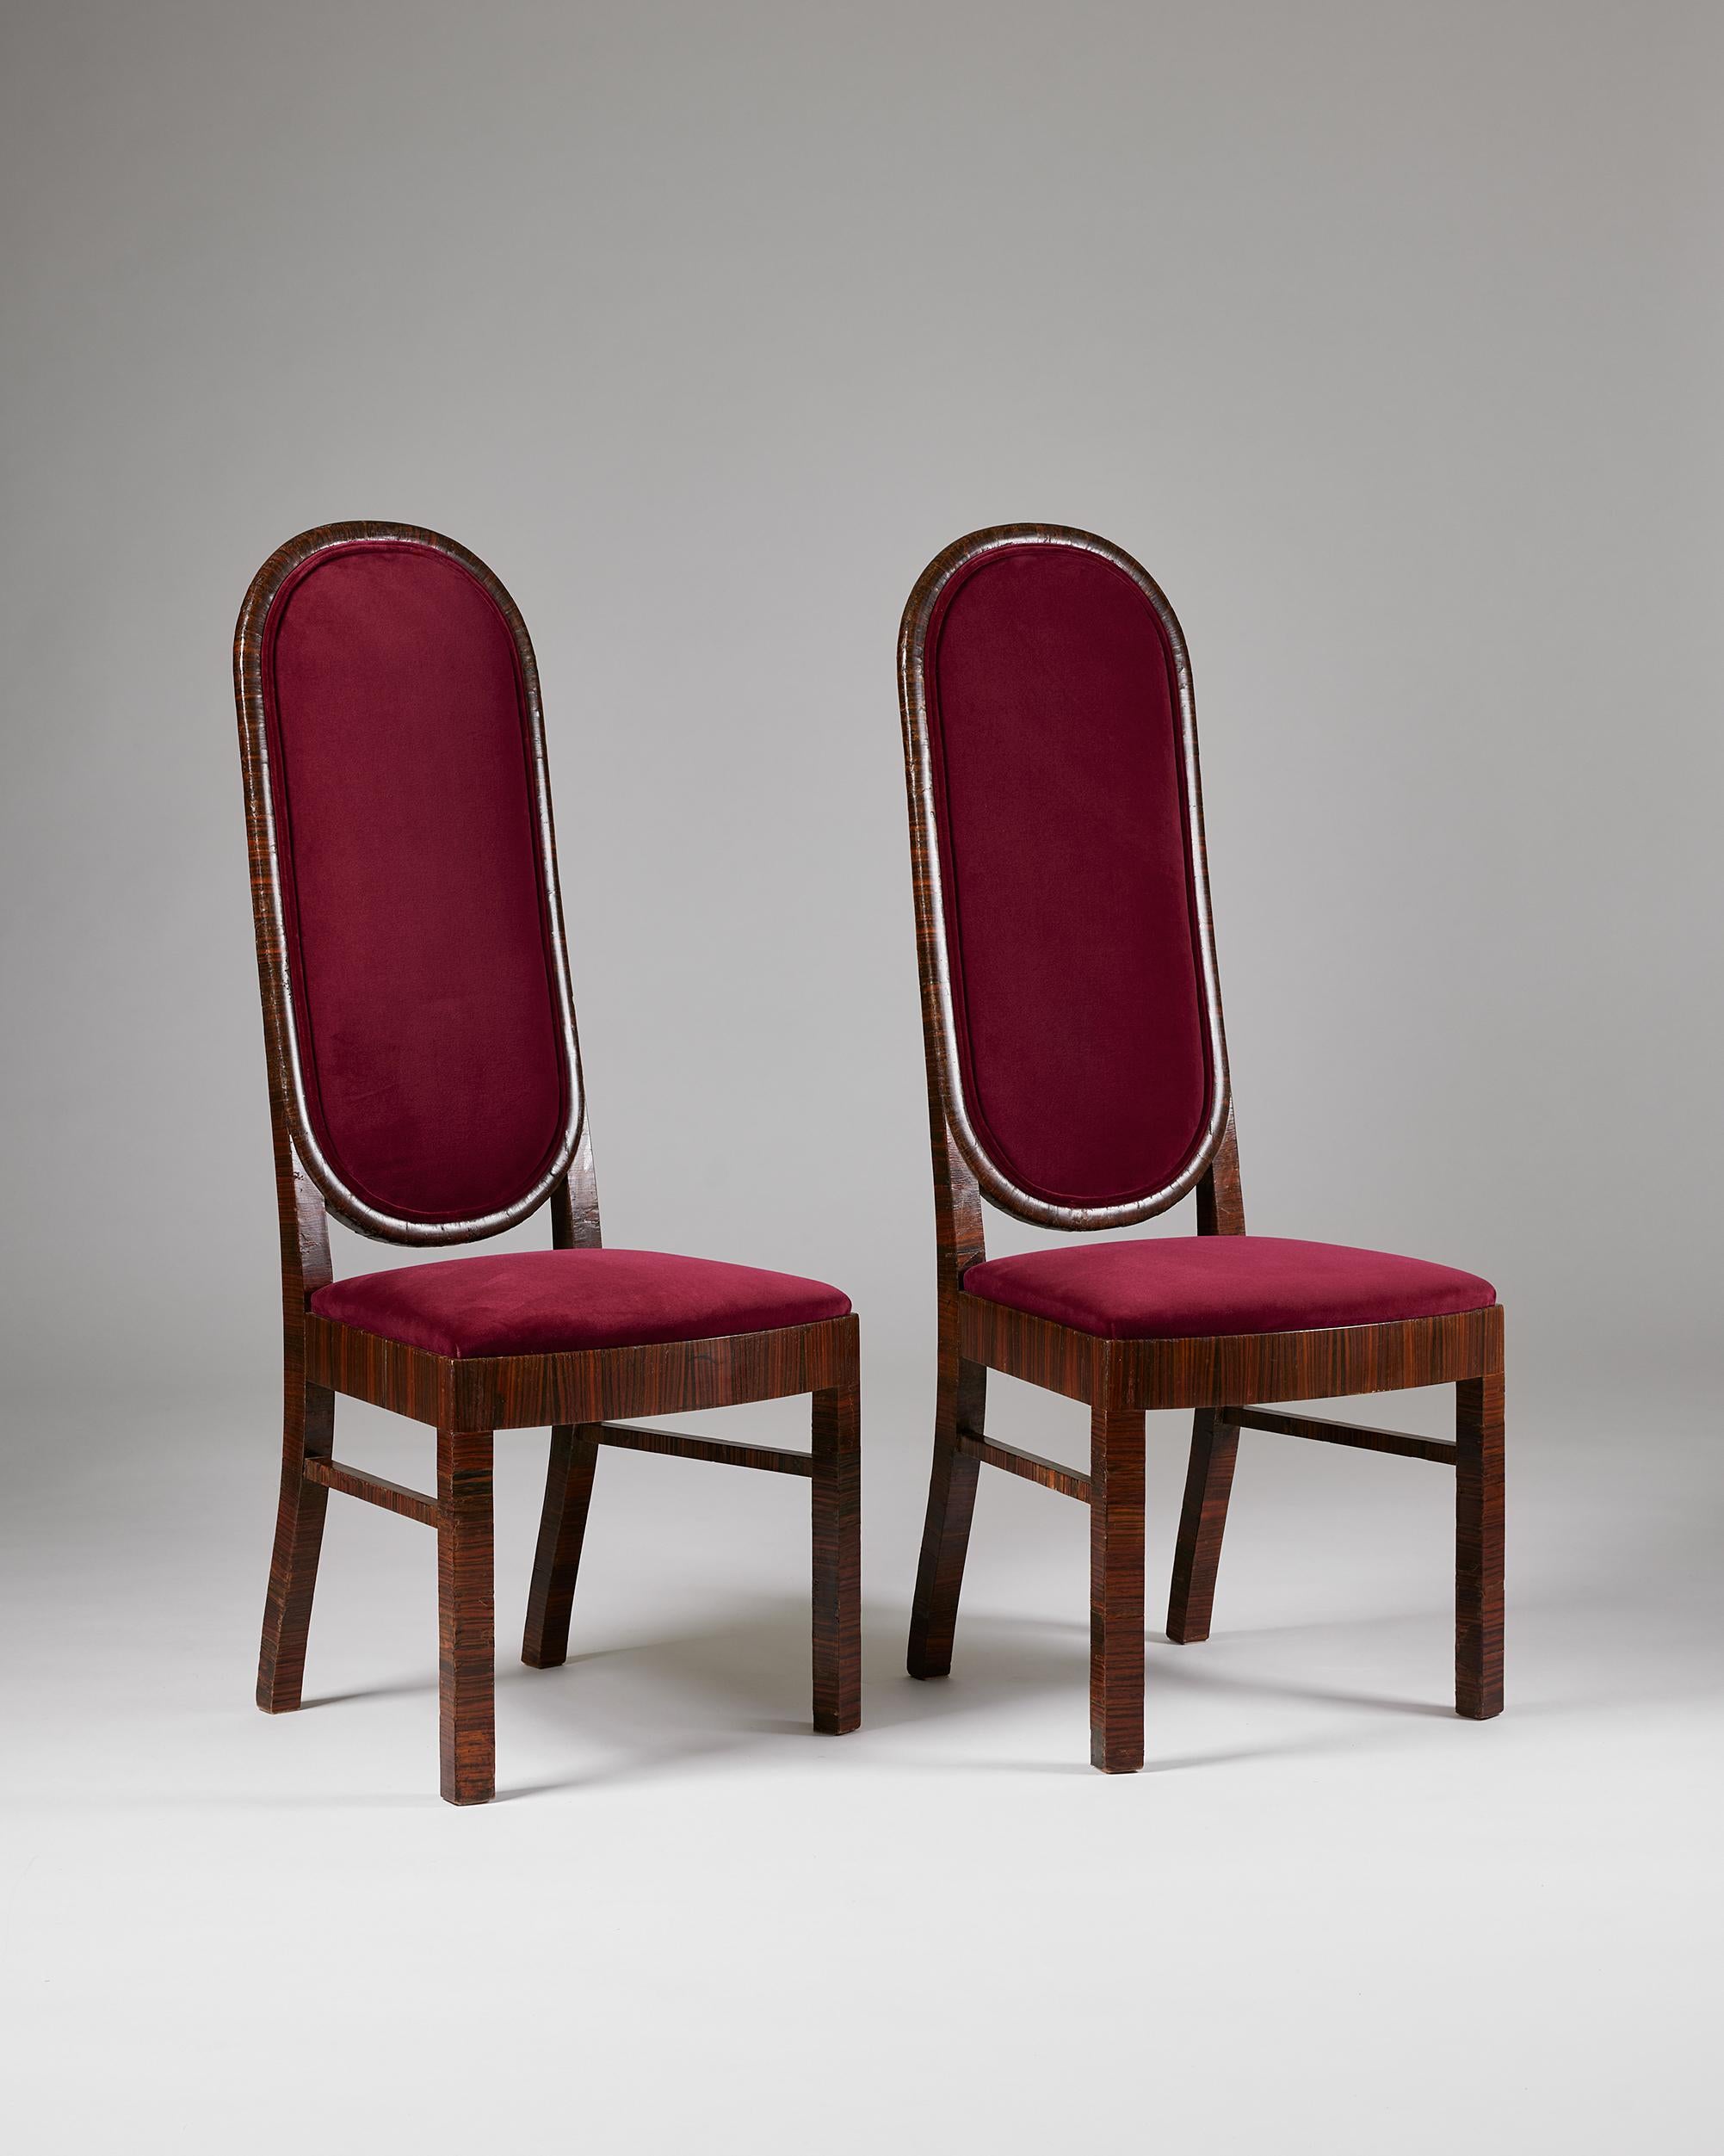 Pair of dining chairs designed by Axel Einar Hjorth for Nordiska Kompaniet,
Sweden, 1934.

Veneered Macassar ebony and velvet.

Stamped.

Provenance: The chairs are said to have stood in the restaurant of the Sports Palace by Sankt Eriksplan Bridge